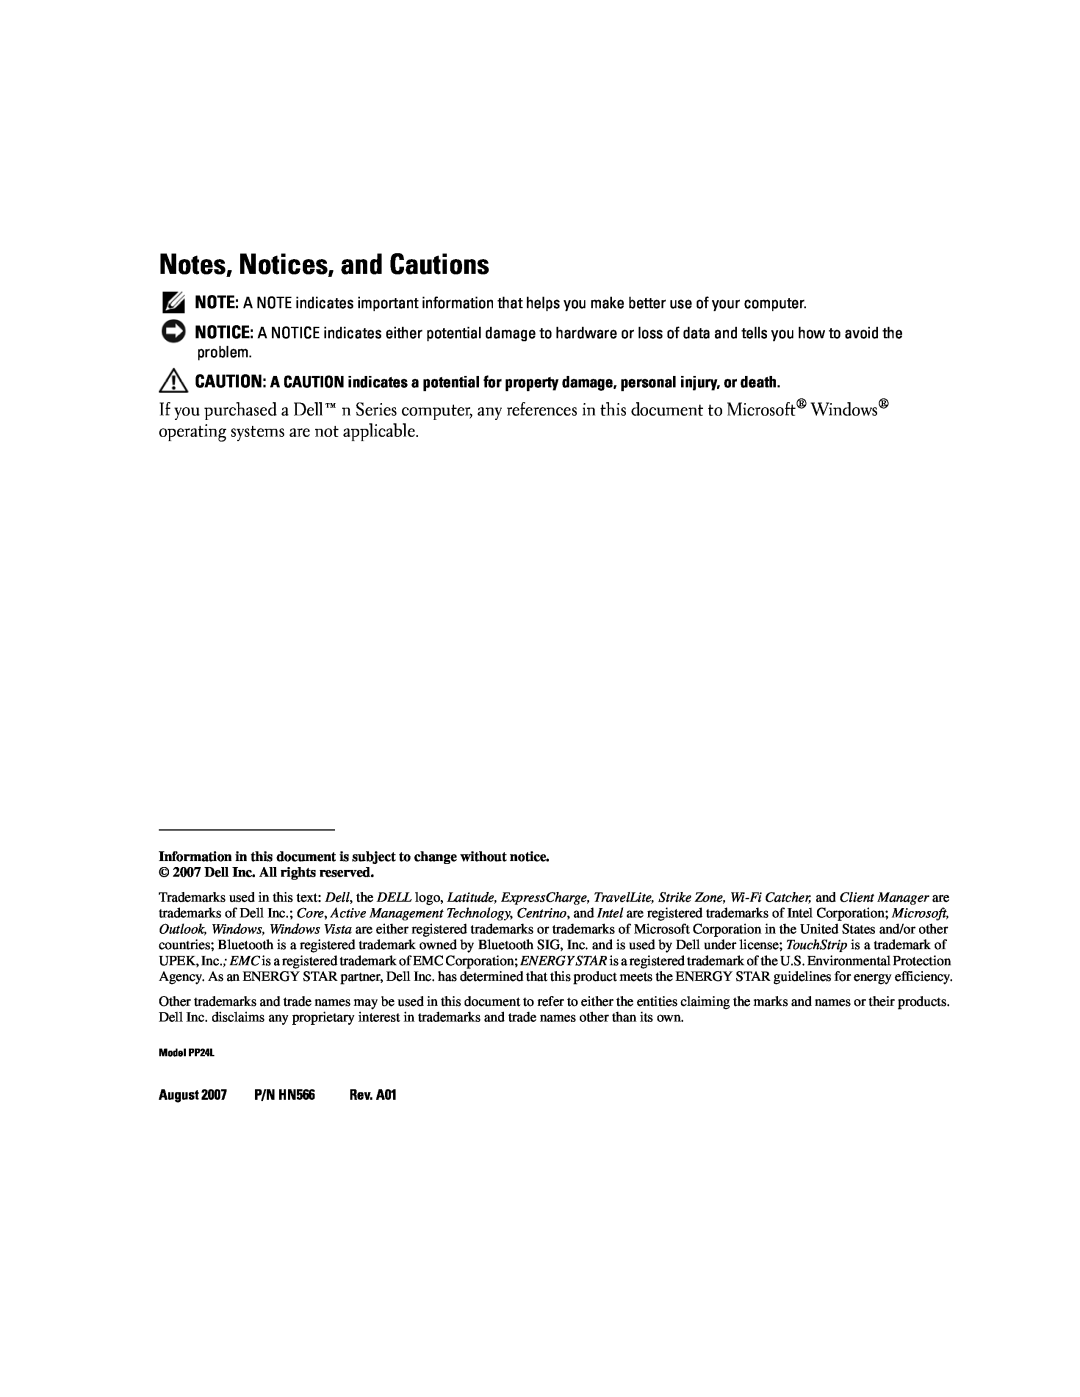 Dell PP24L manual Notes, Notices, and Cautions, August, P/N HN566 